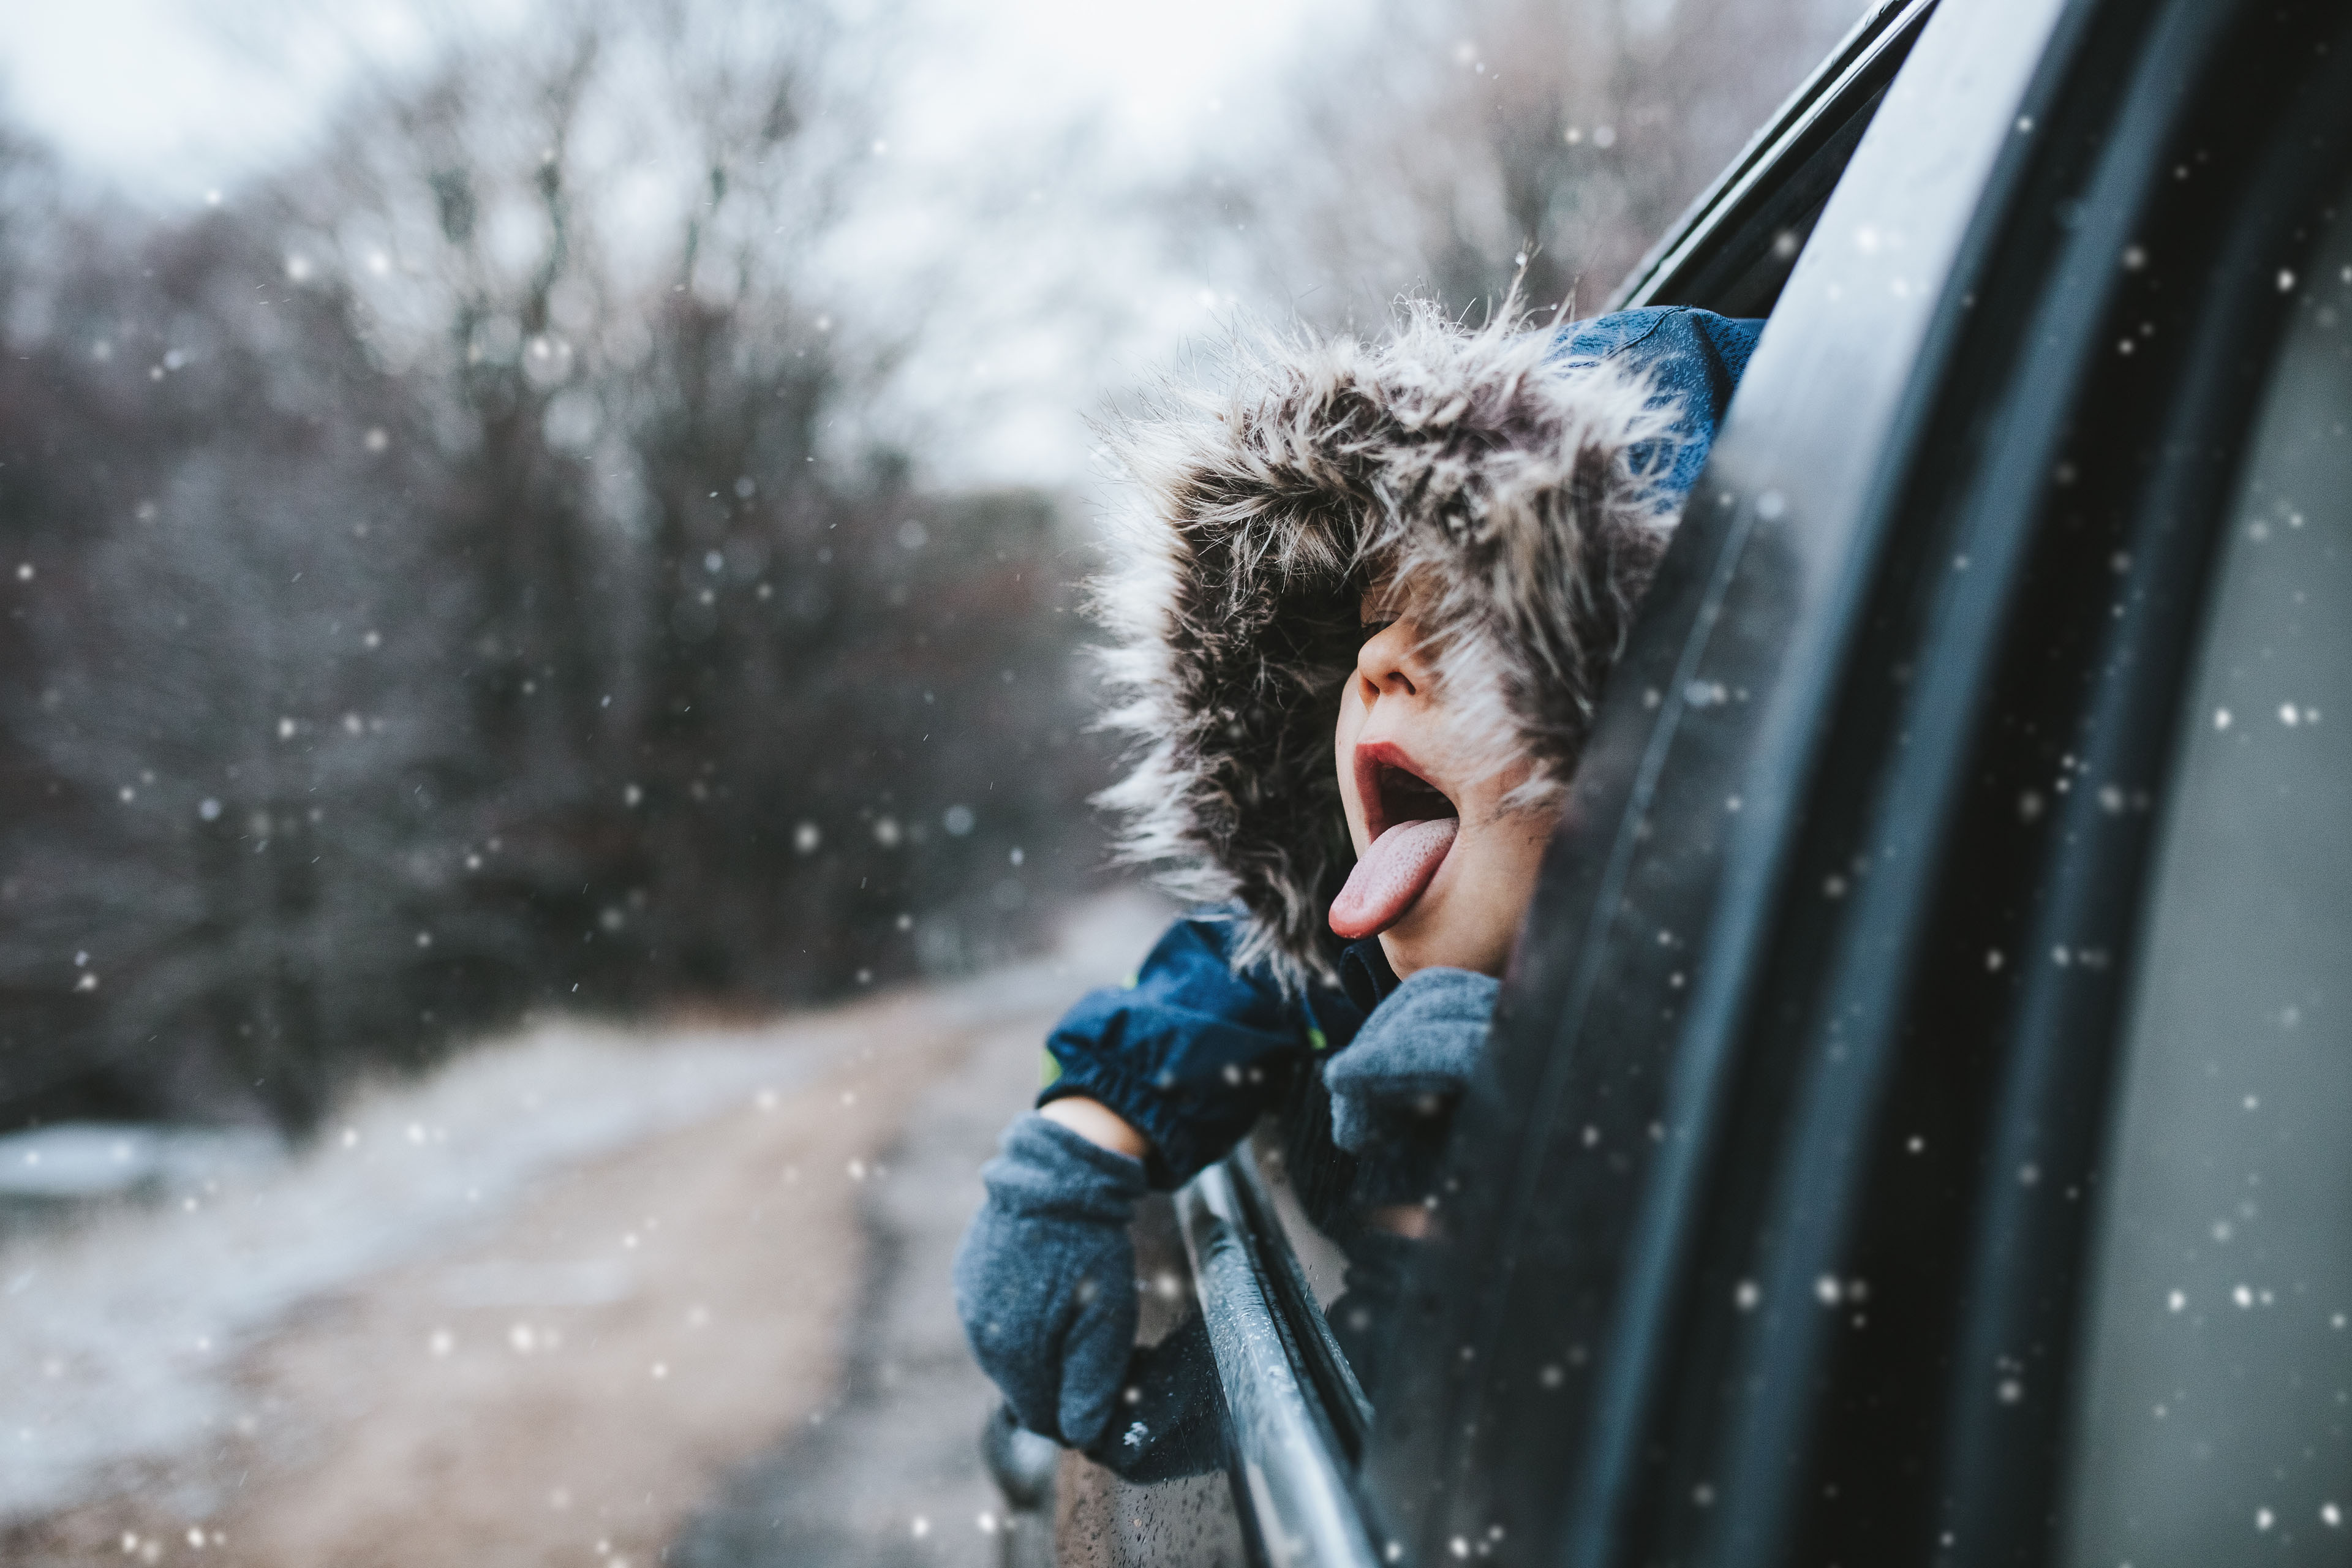 Boy catching snowflakes out of car window